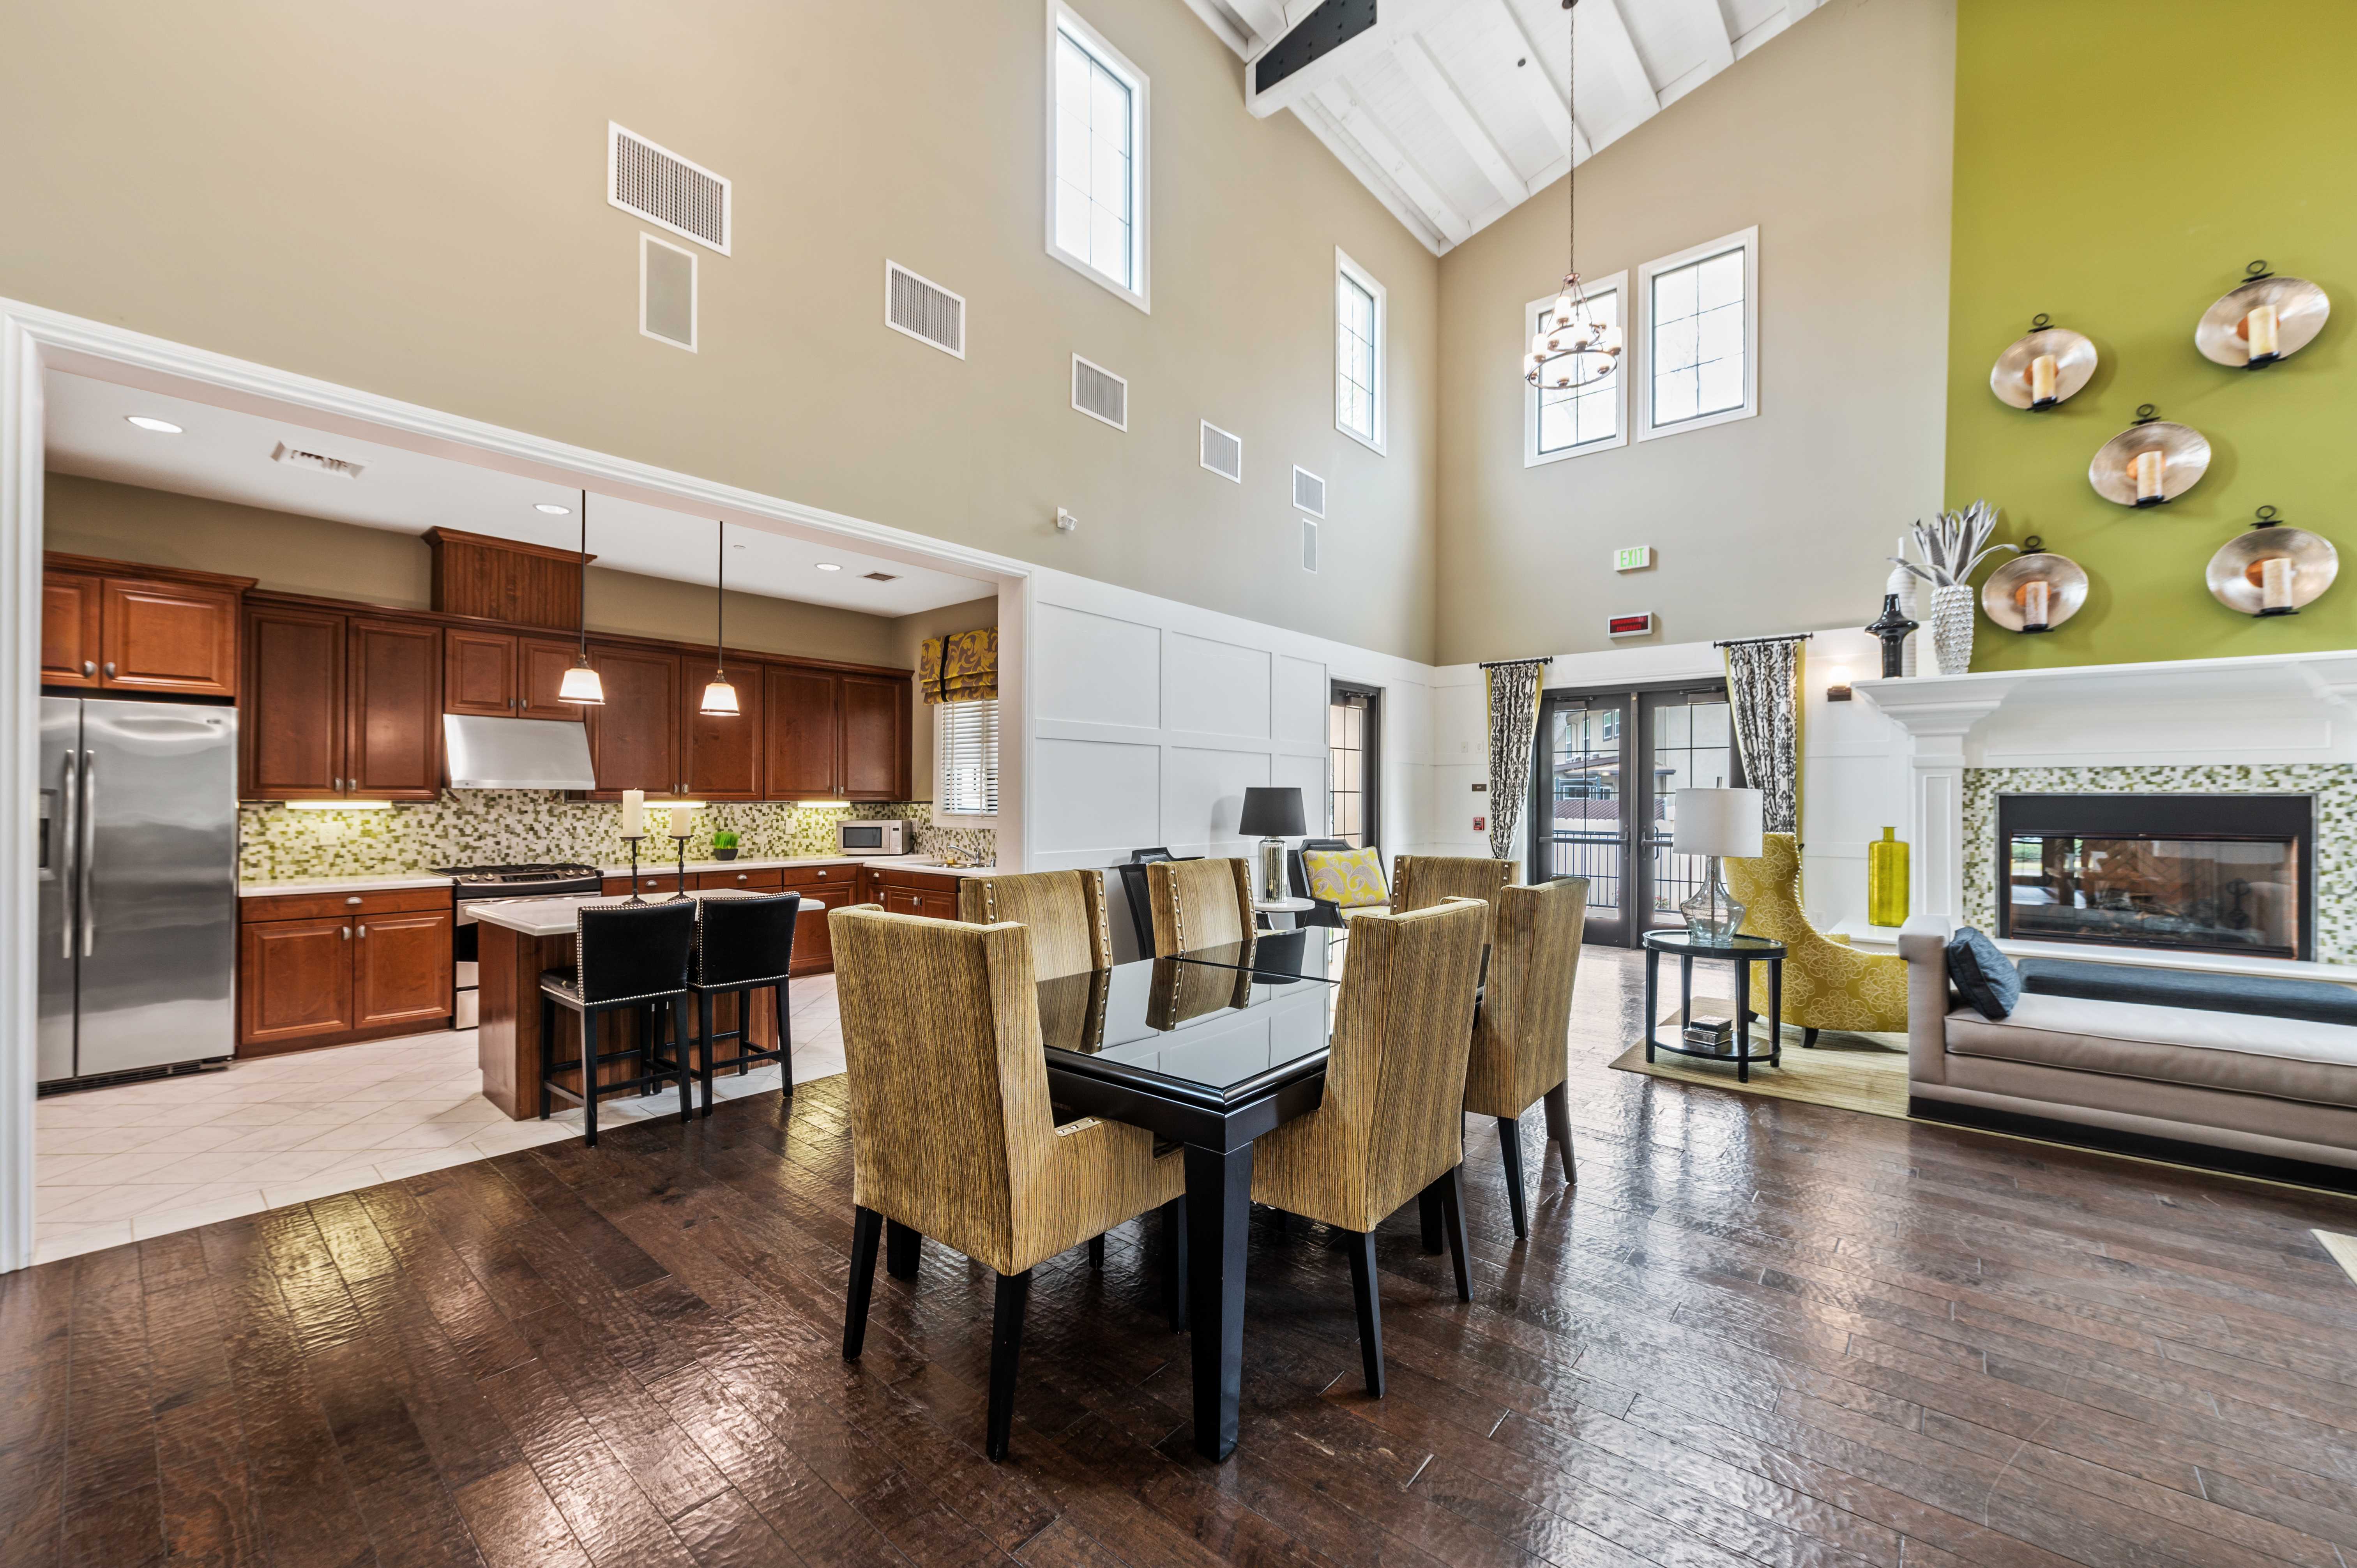 Community clubhouse with full kitchen, fire place, and seating at Coral Sea Cove in Port Hueneme, California